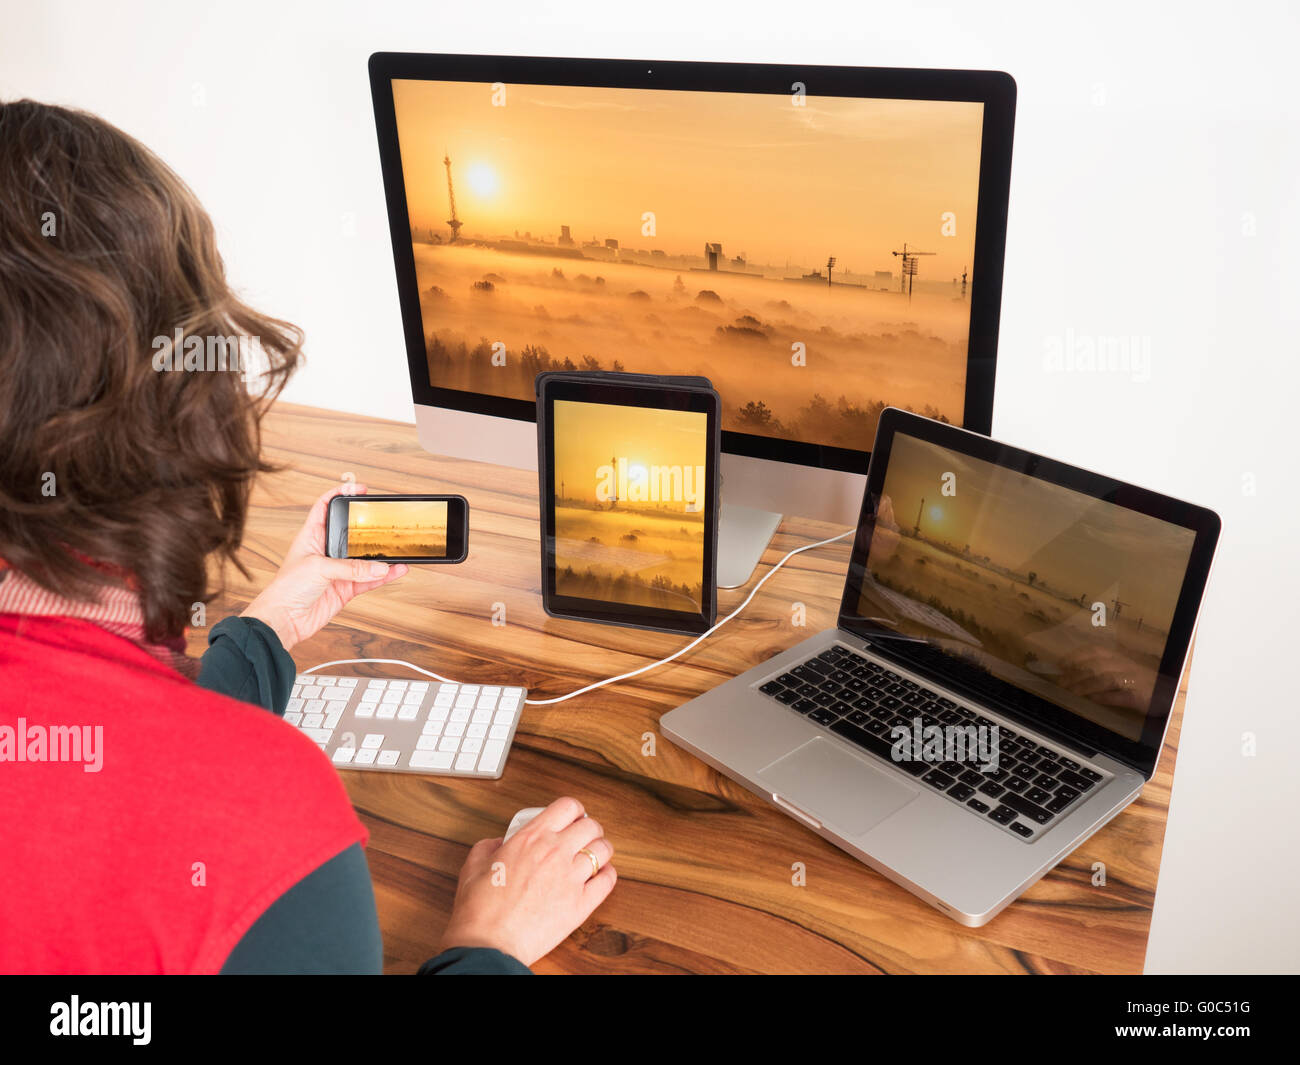 Woman with networked computer and mobile devices Stock Photo